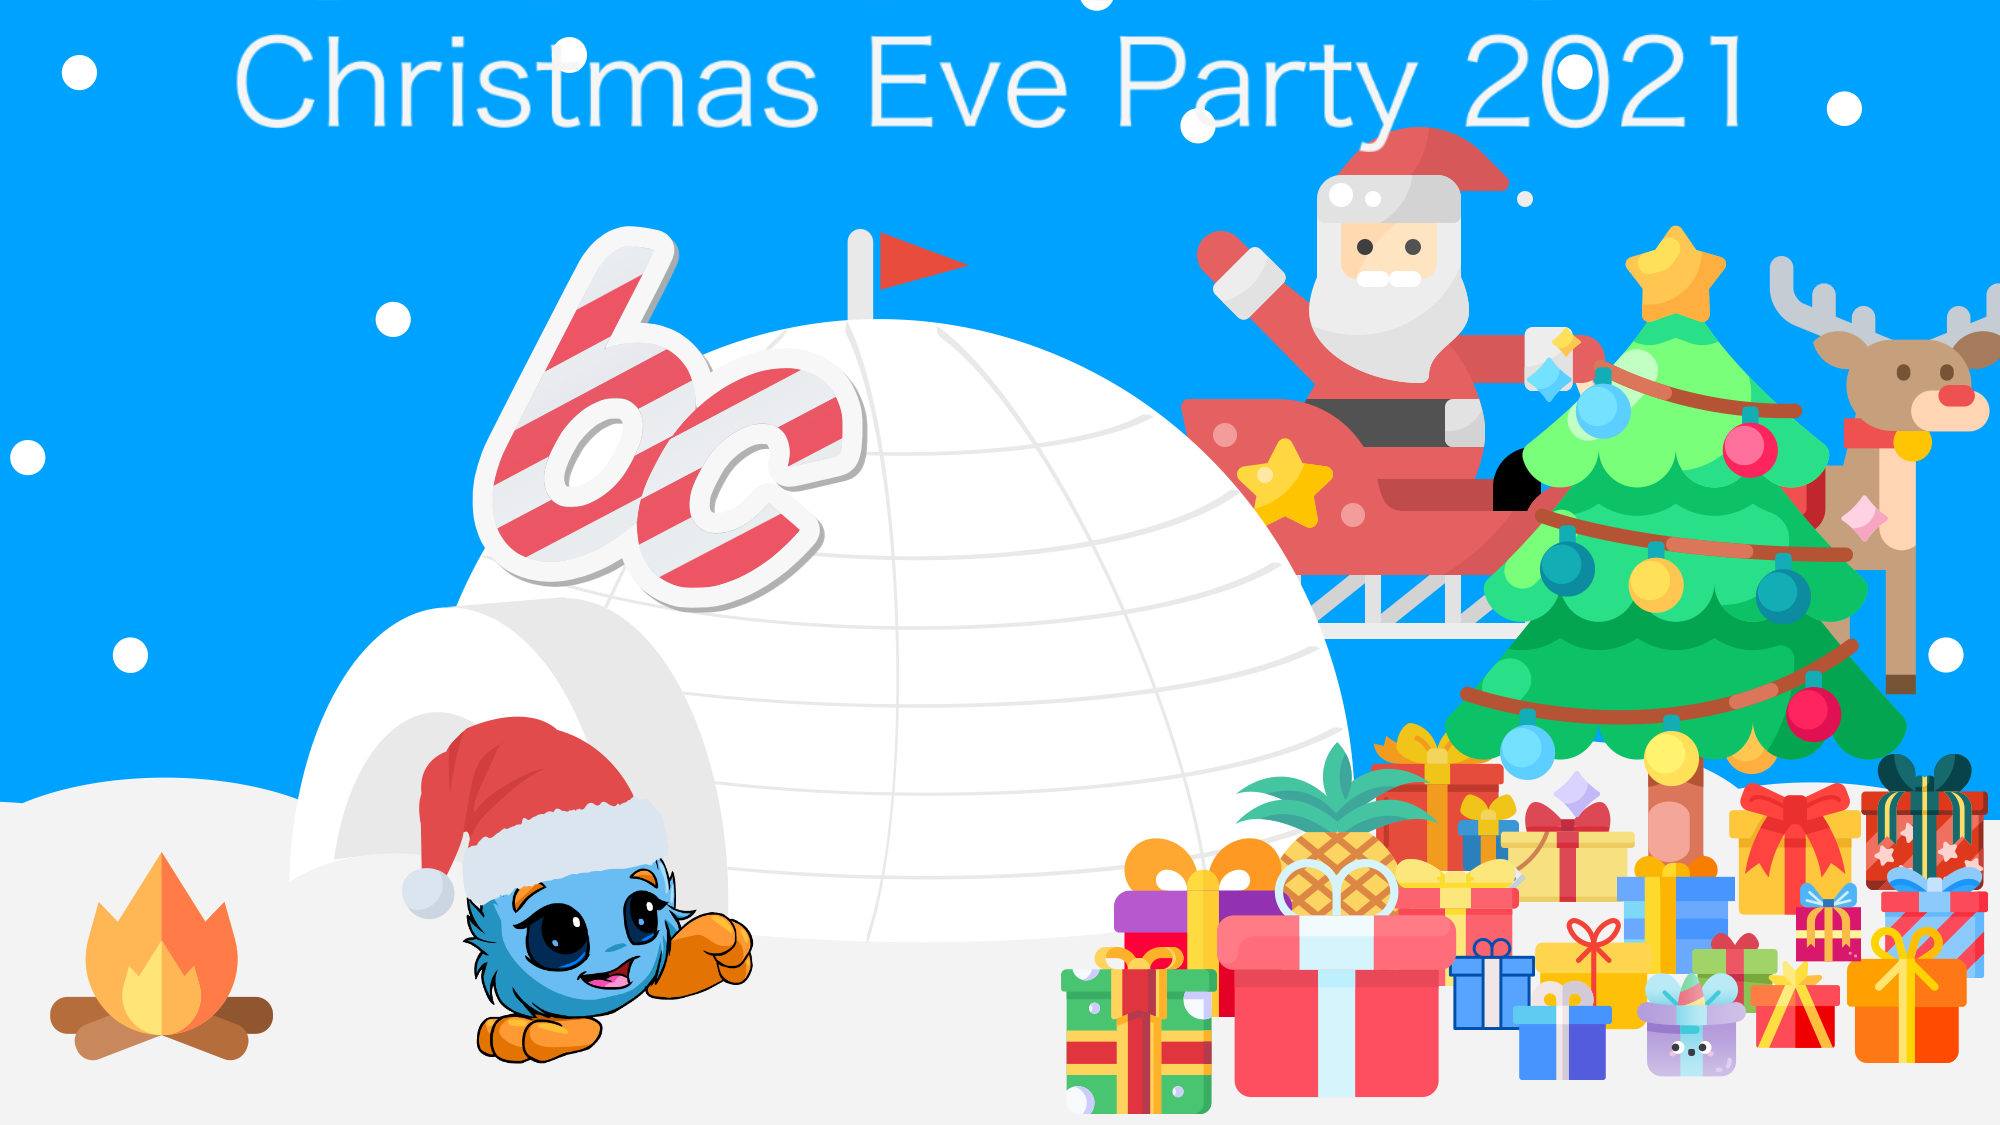 BetaChat Christmas Eve Party 2021